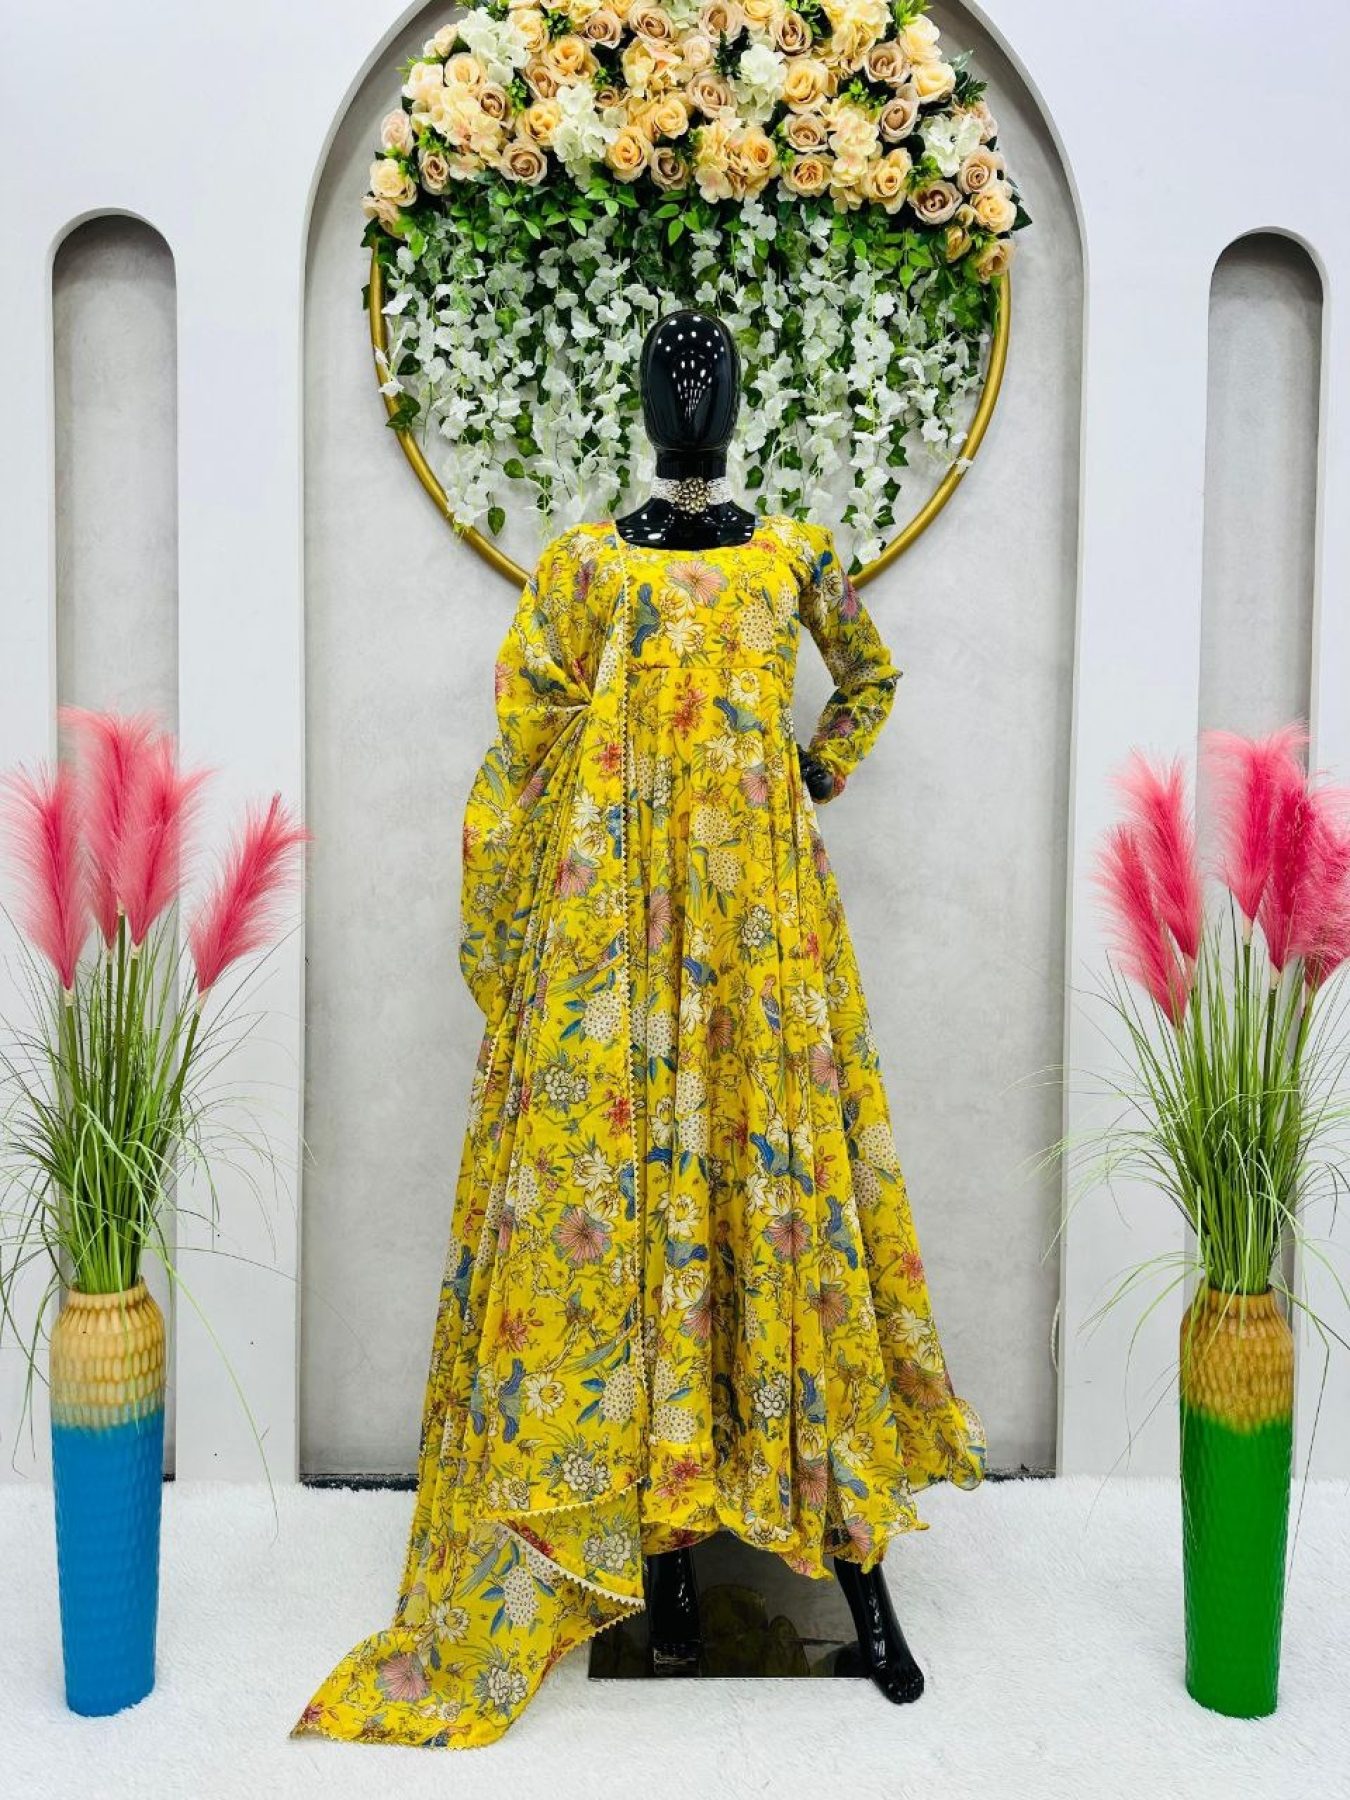 Foria women cotton kurti and kutra ( yellow floral printed) fully stitched  | eBay